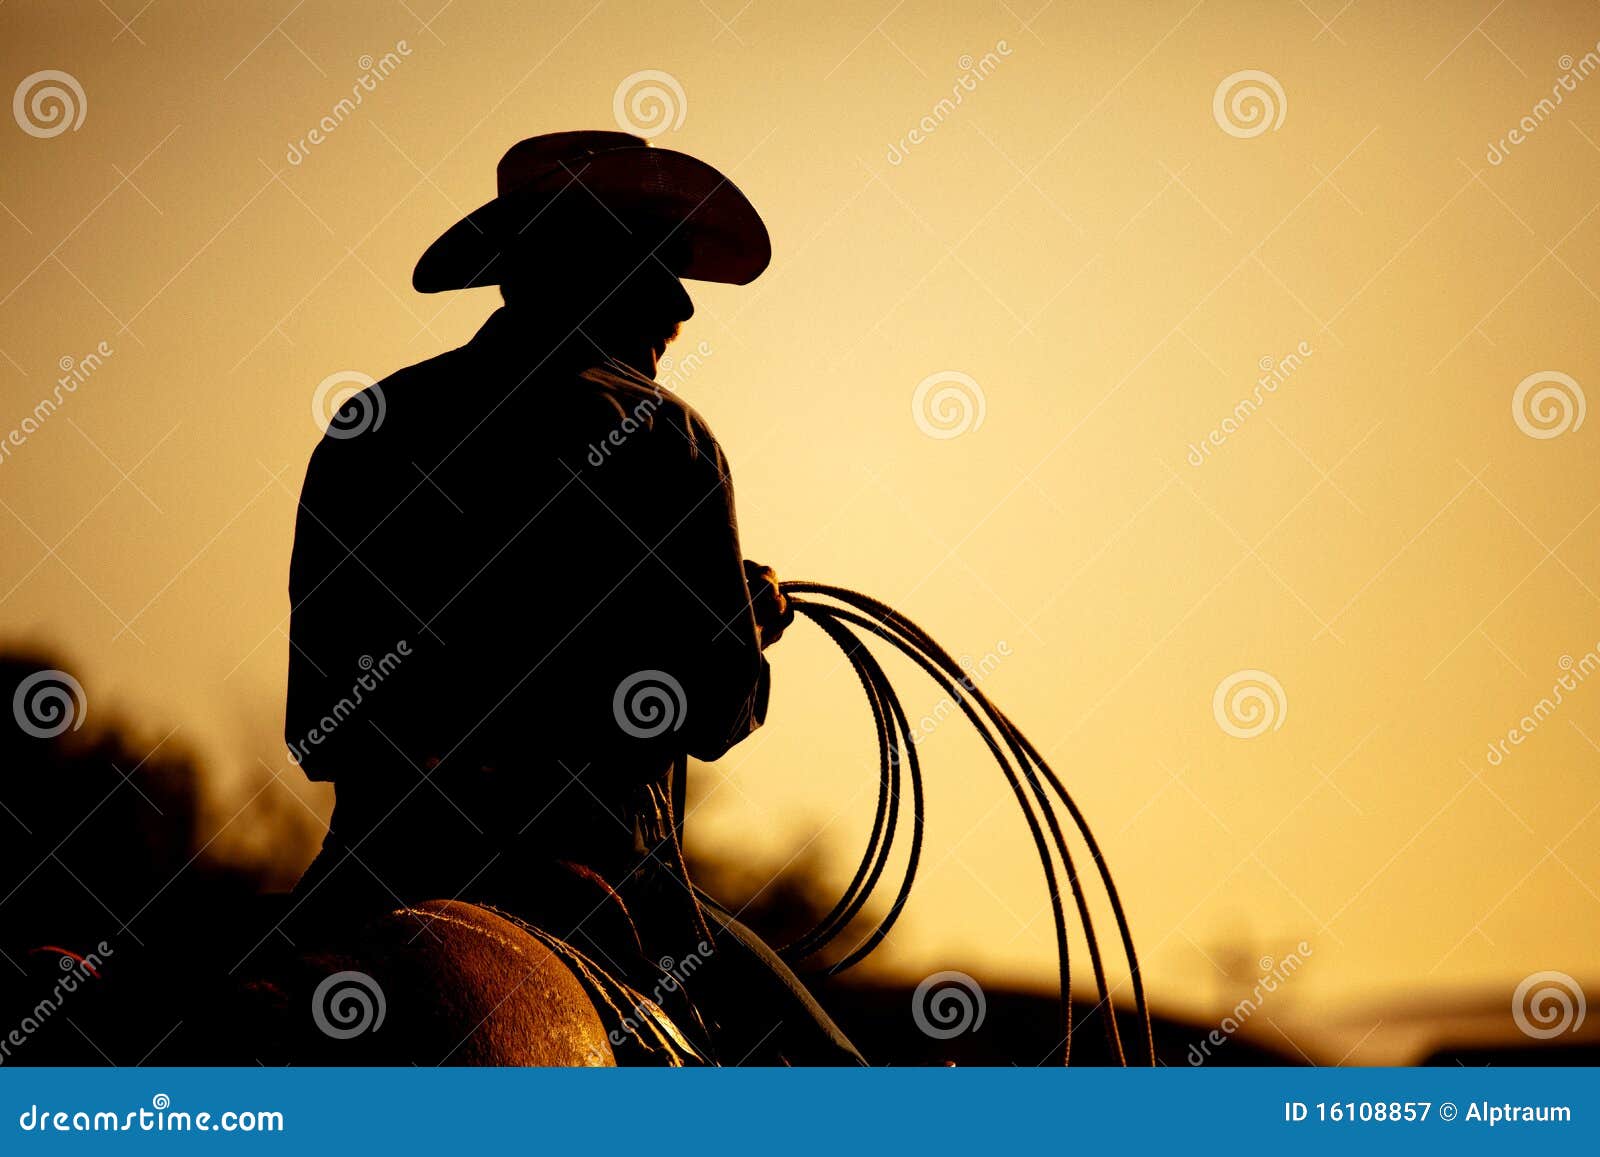 rodeo cowboy silhouette